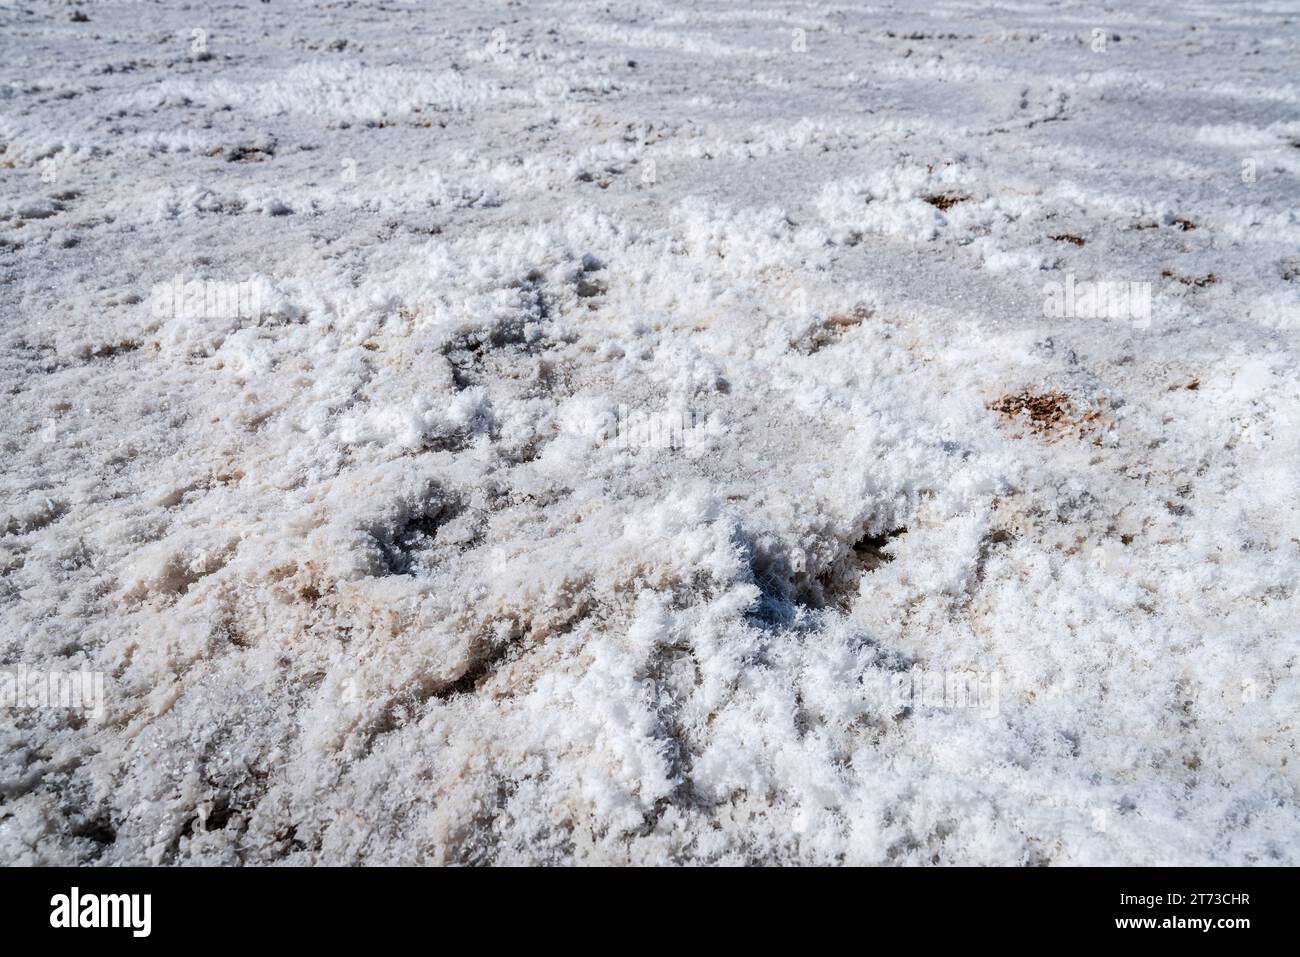 Close-up image of salt crystals on the ground of Badwater Basin in Death Valley National Park in California Stock Photo